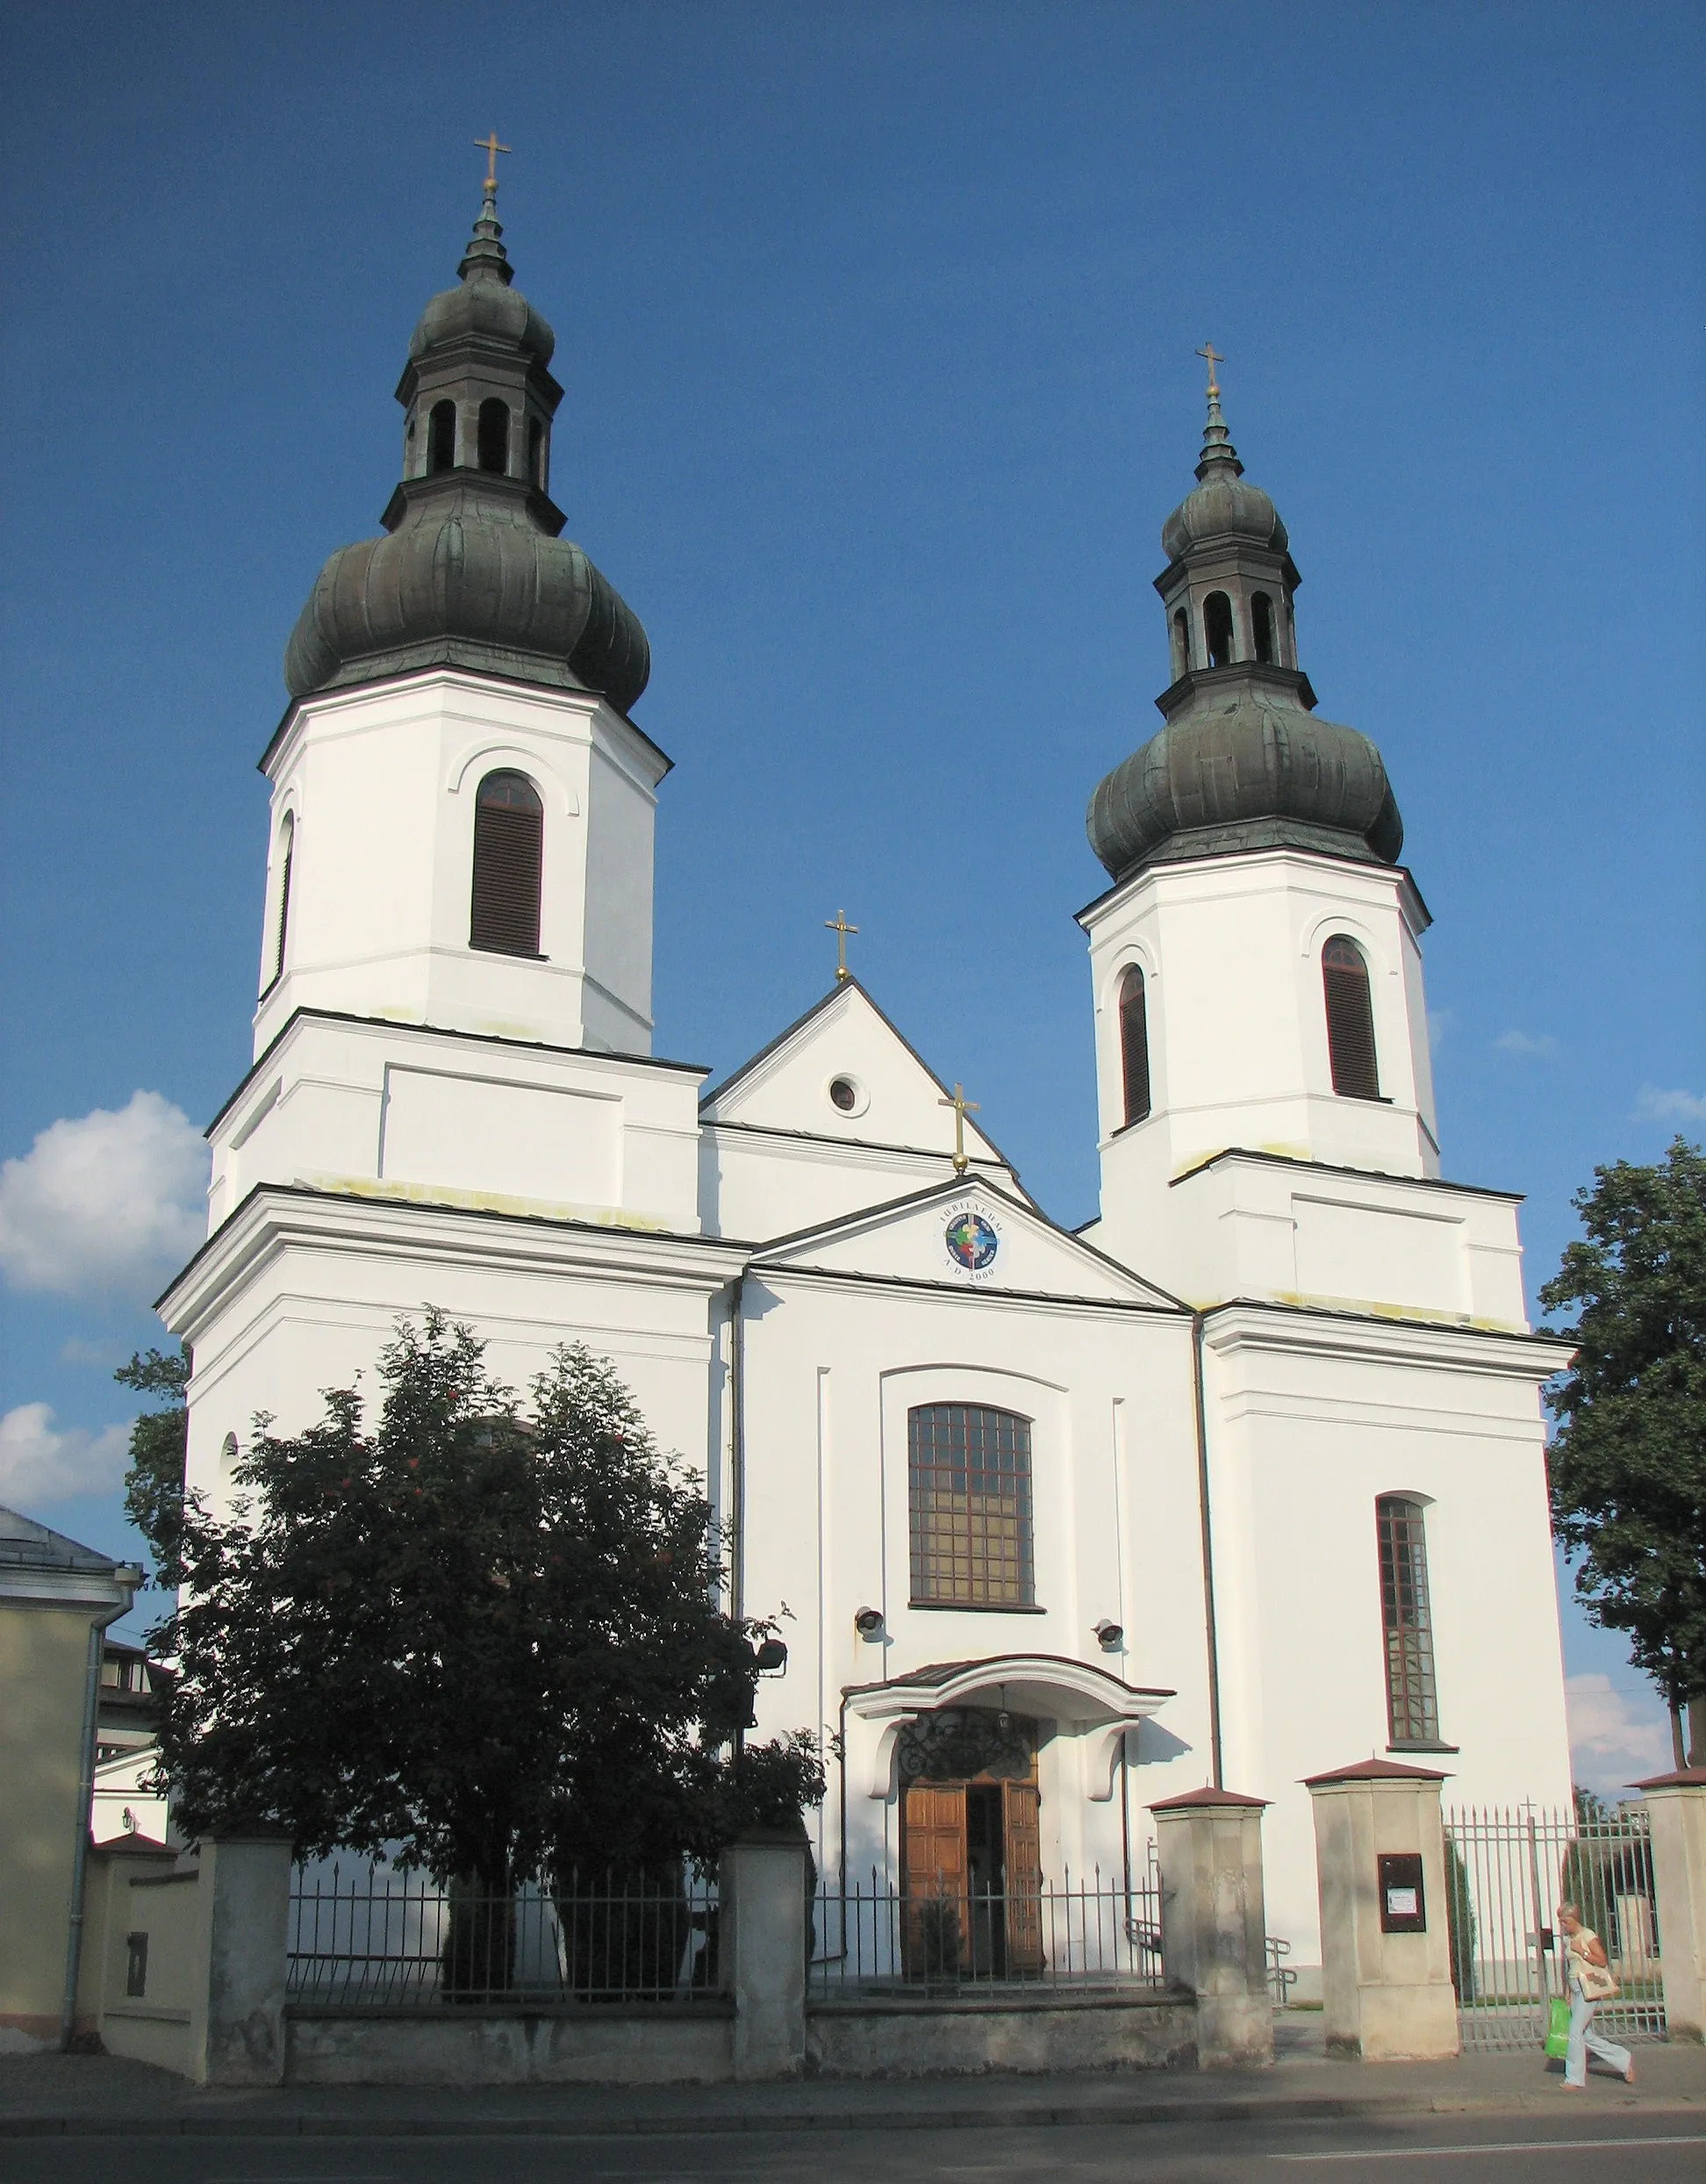 Photo showing: The church of  Our Lady of Mount Carmel in Bielsk Podlaski, Poland